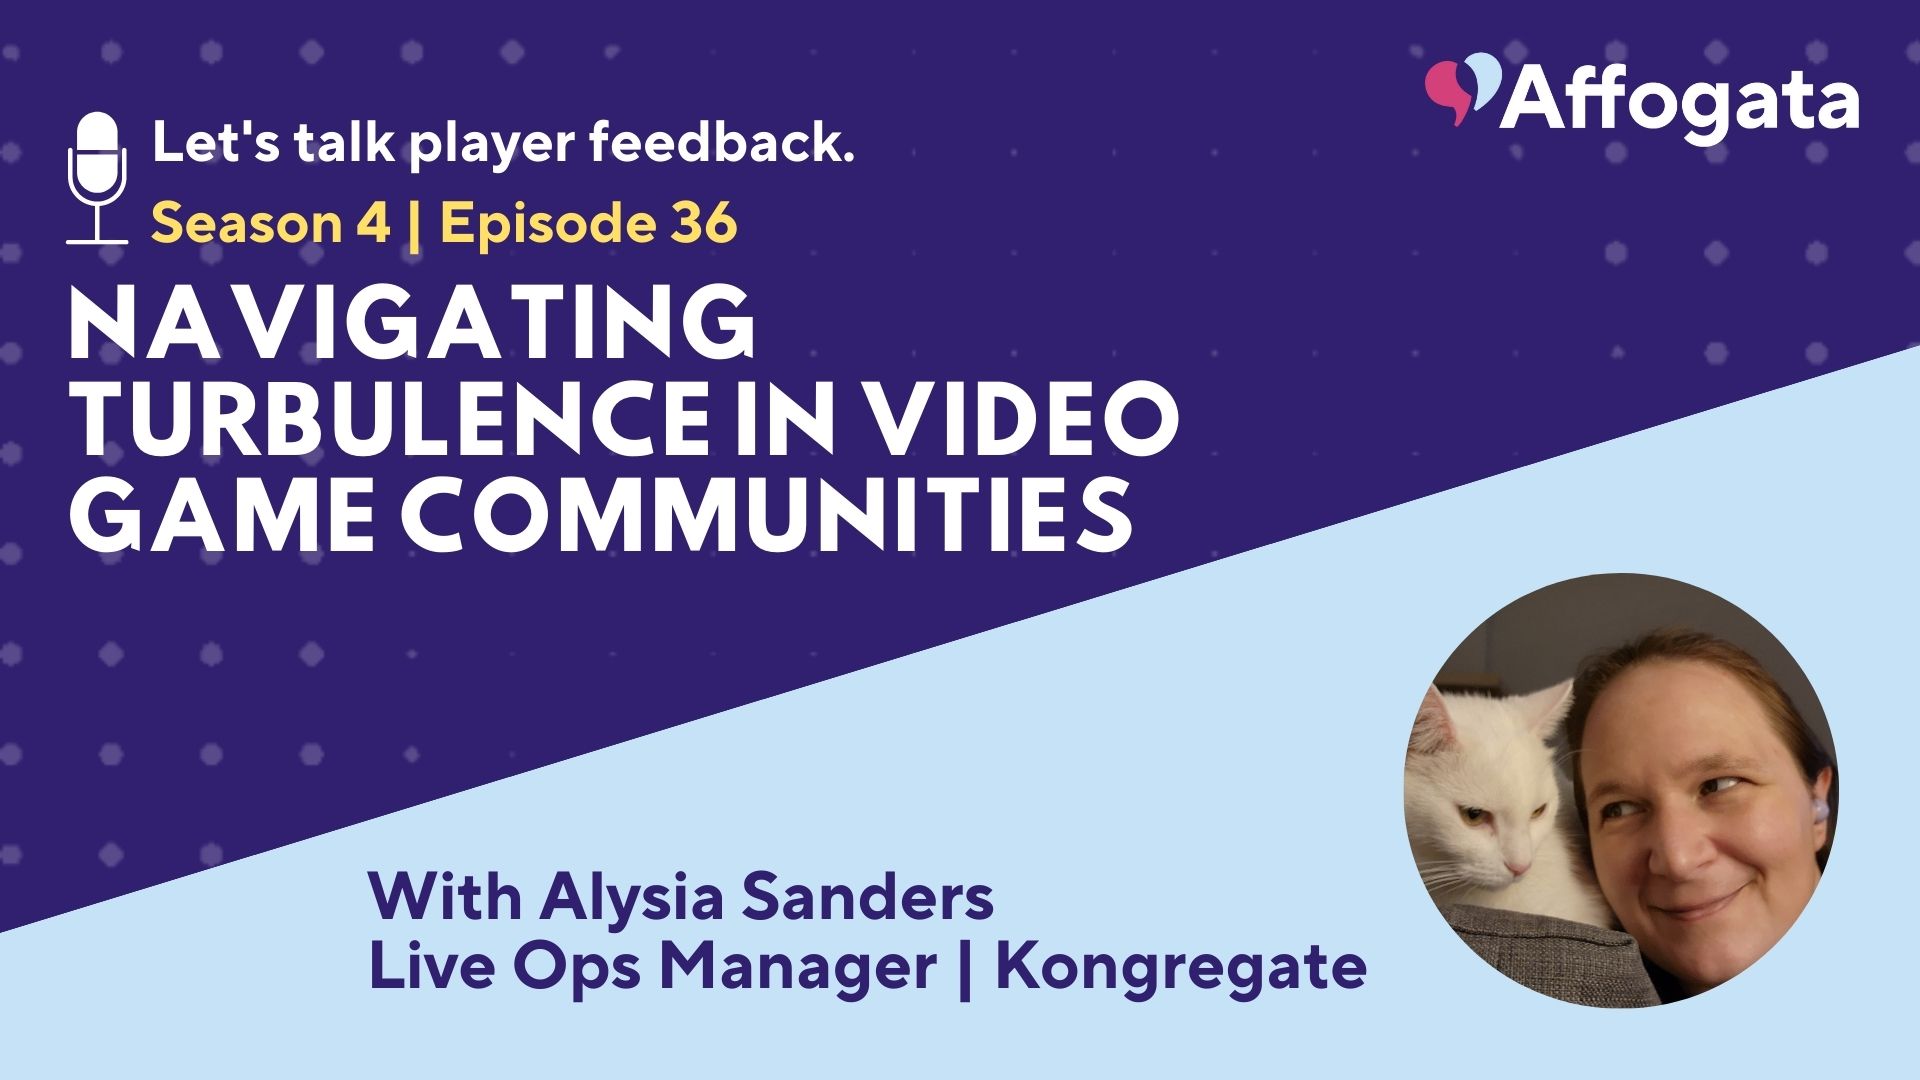 Navigating Turbulence in Video Game Communities | With Alysia Sanders from Kongregate